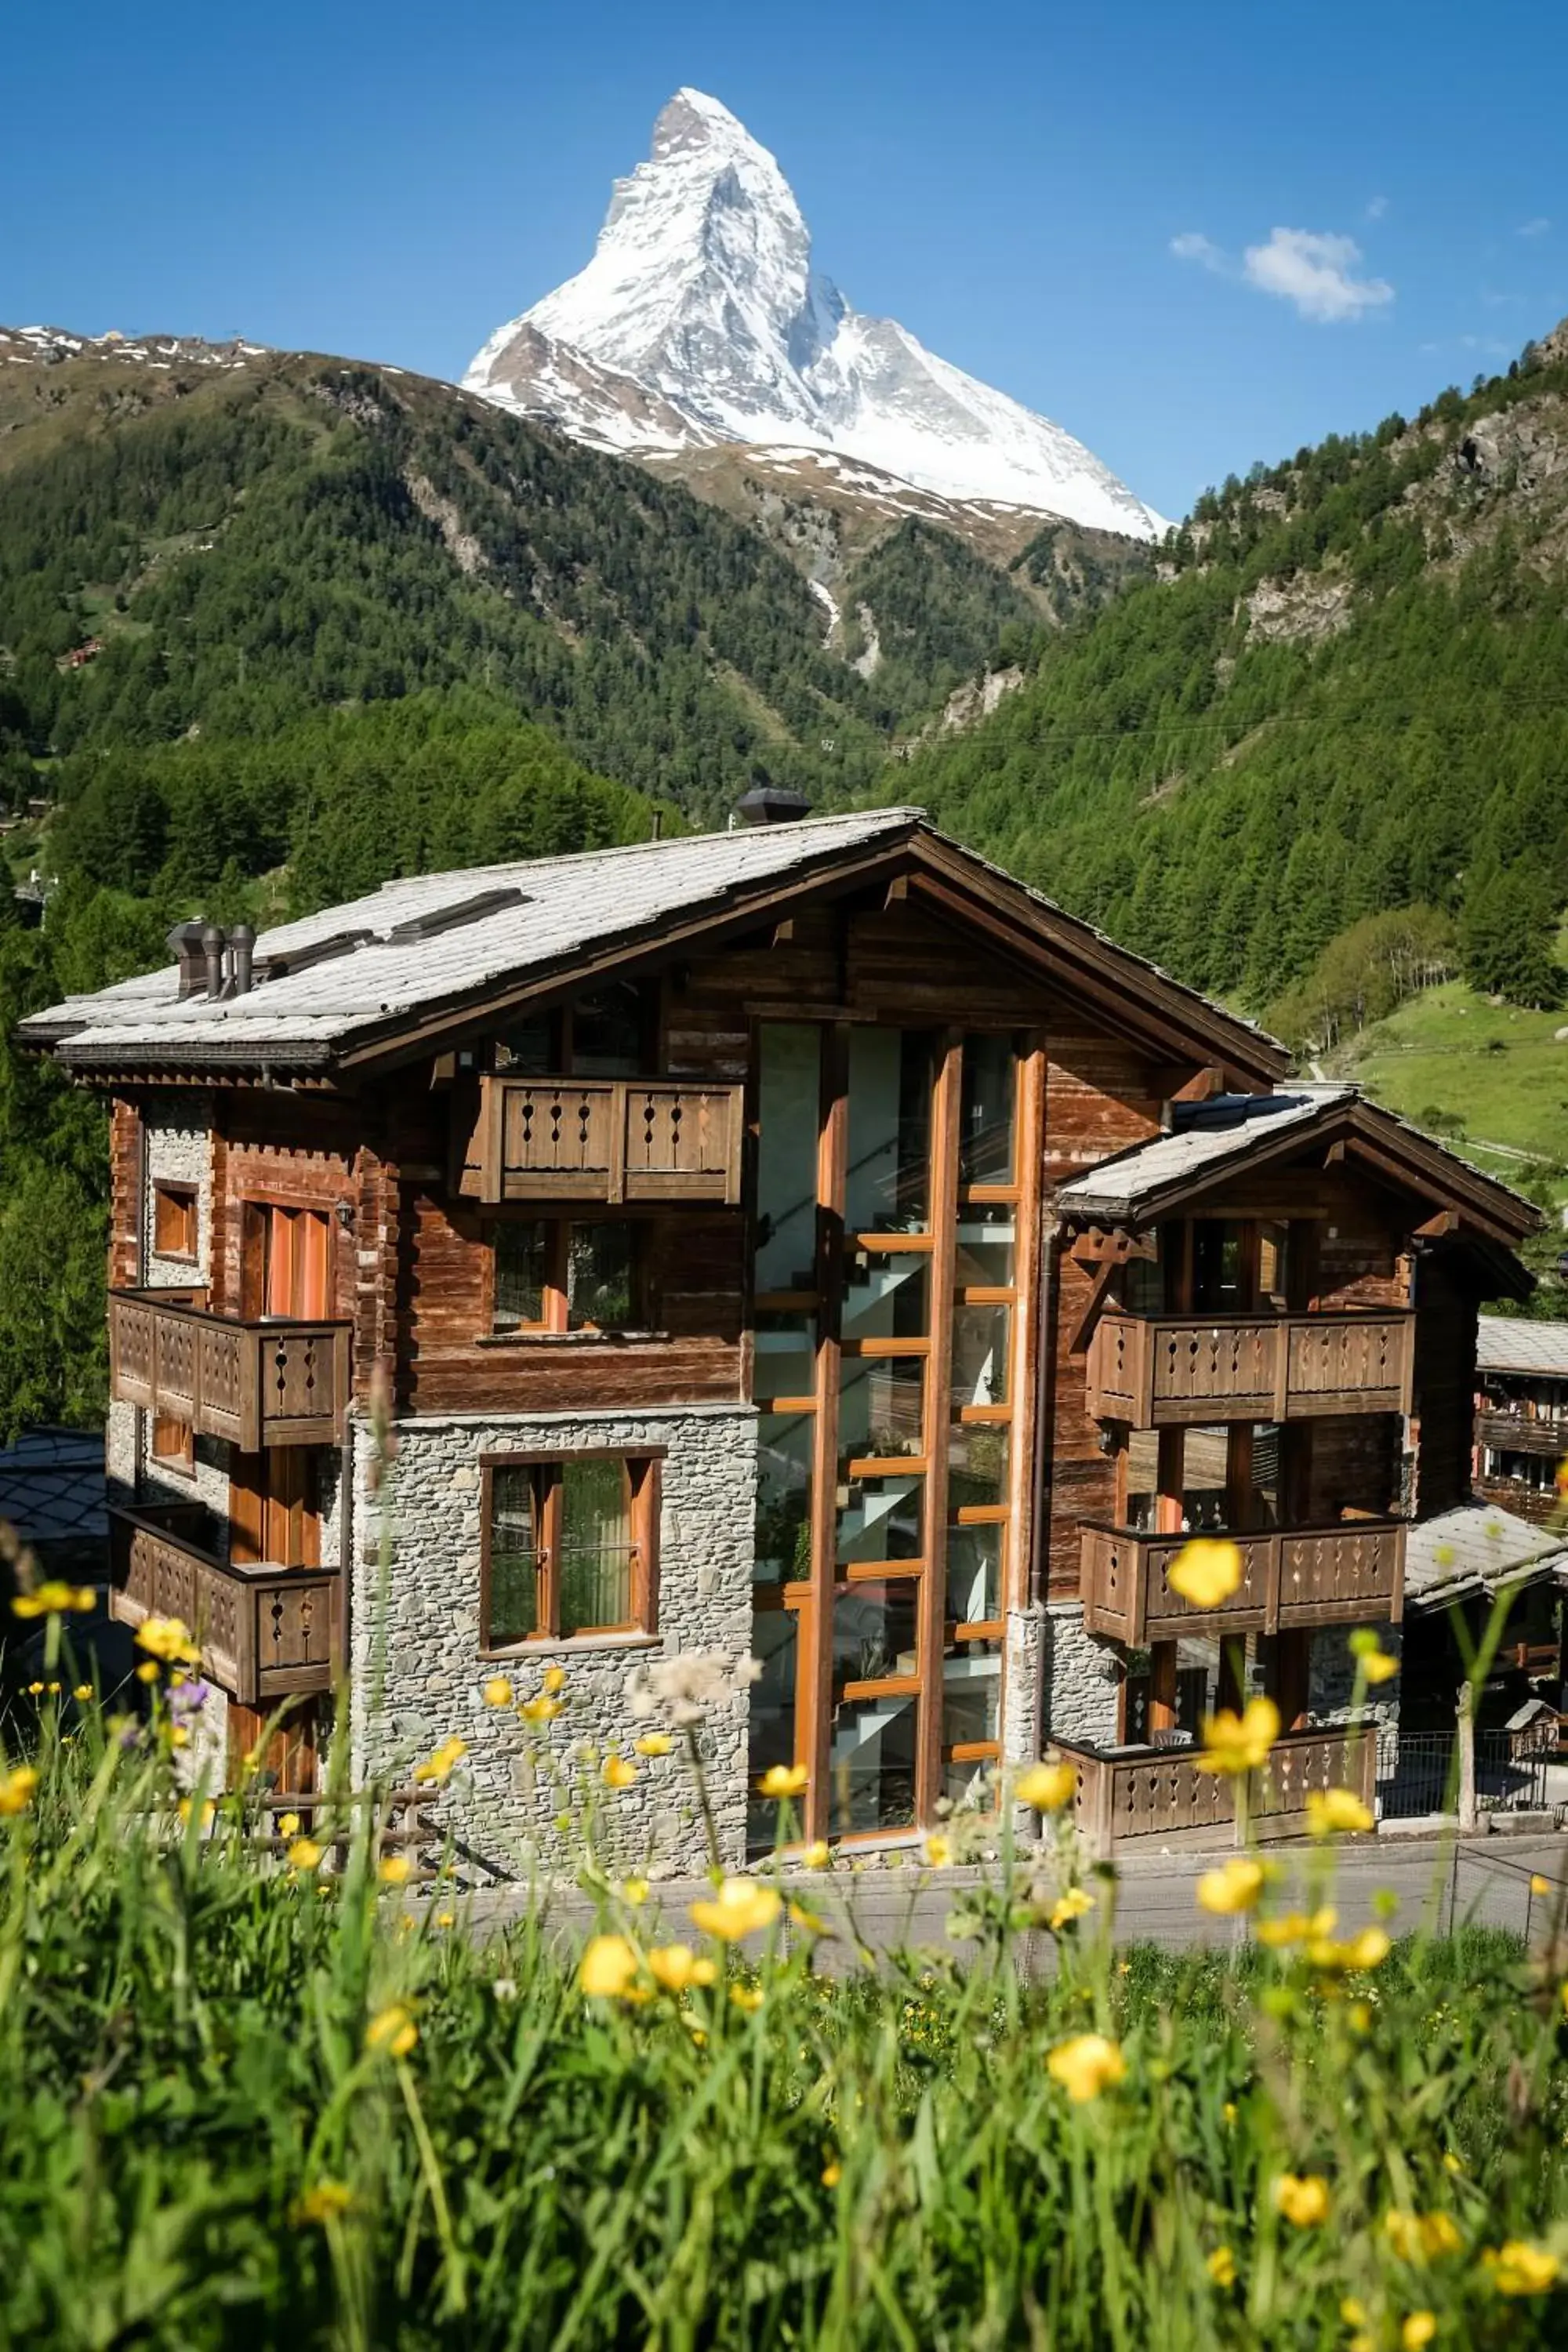 Property Building in Mountain Paradise